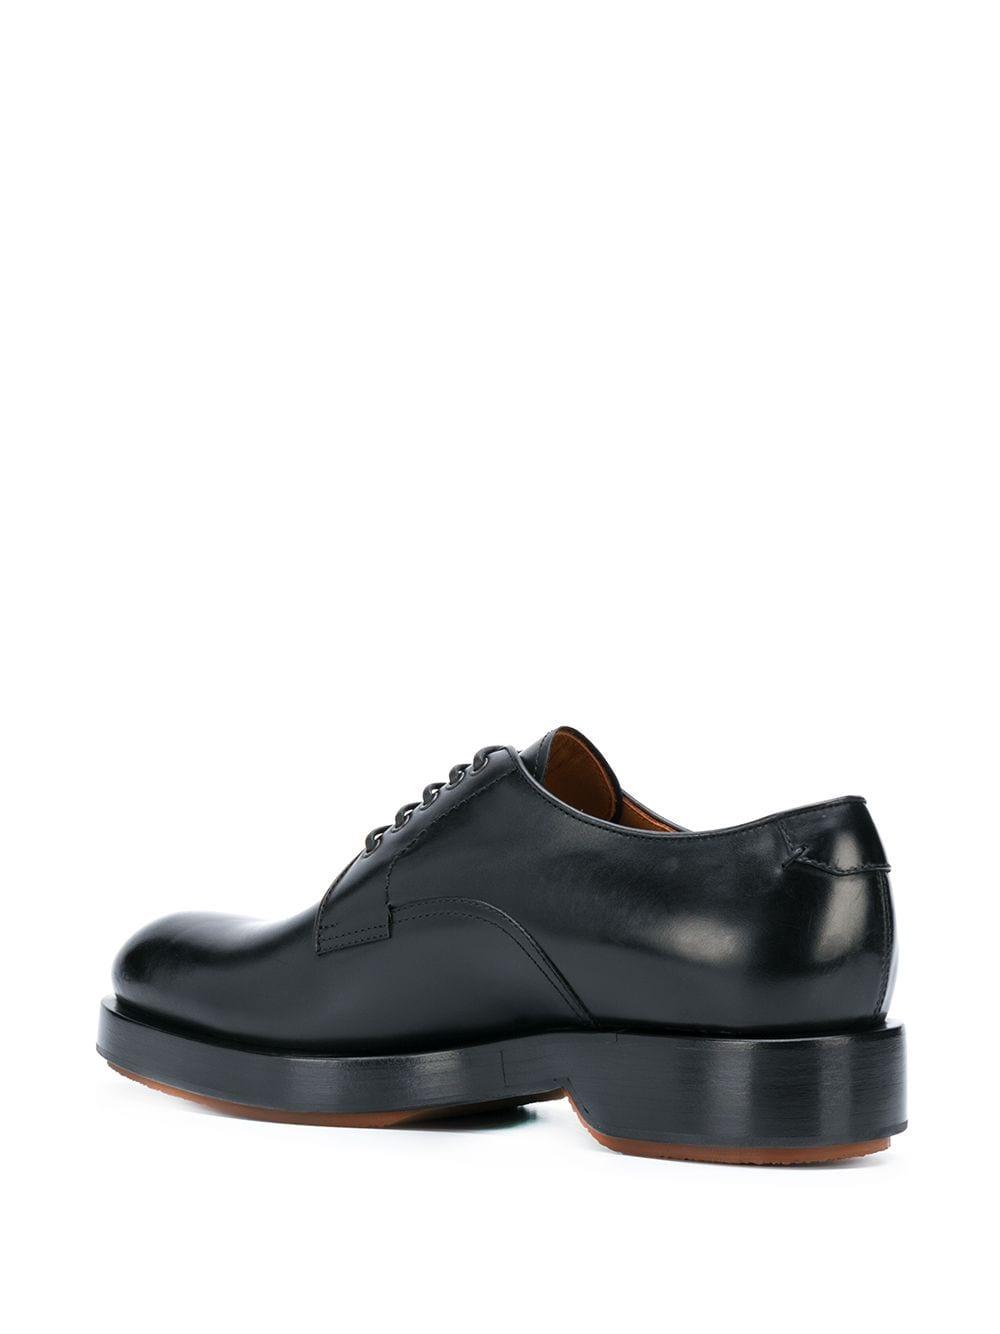 Ermenegildo Zegna Leather Derby Shoes With Sole Layer Detail in Black ...